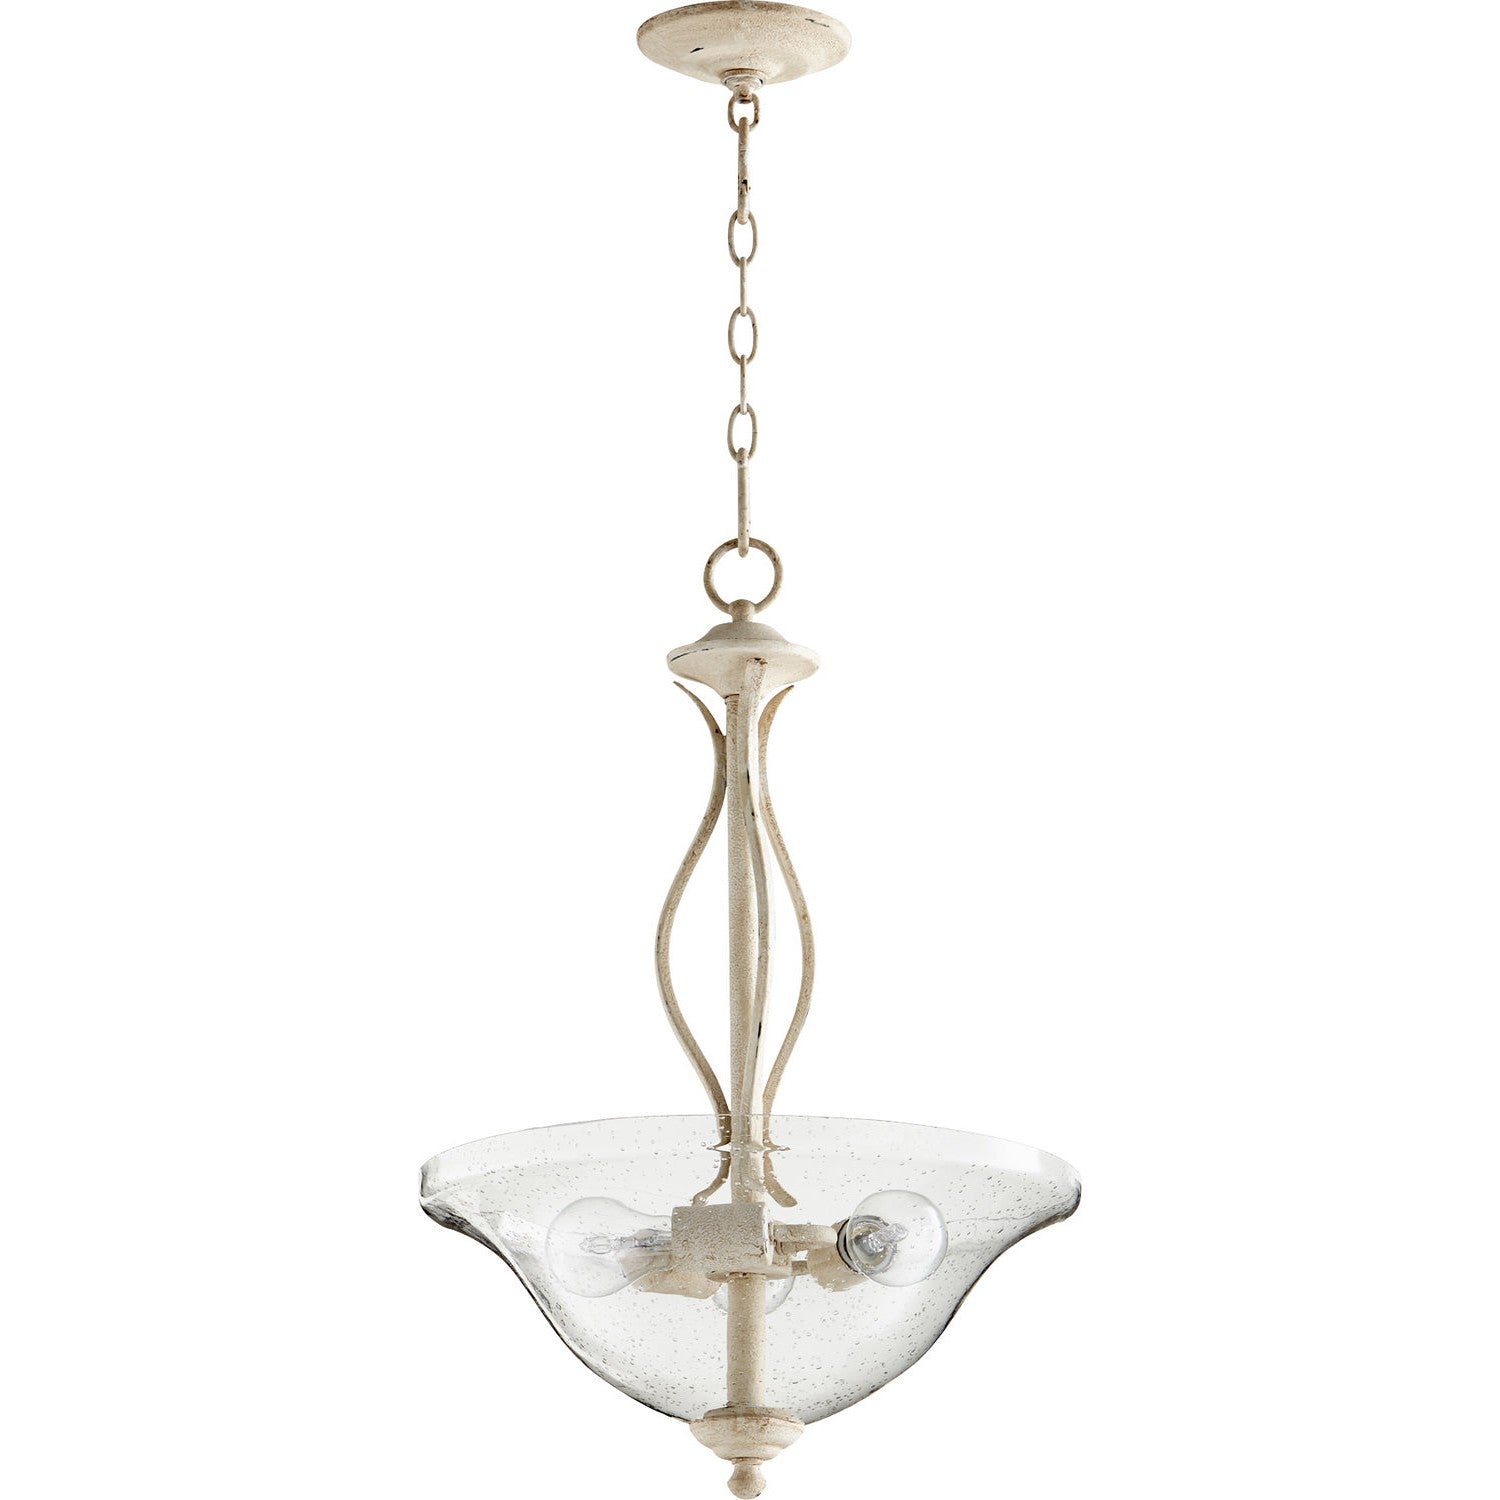 Quorum Spencer 8110-3-170 Pendant - Persian White W/ Clear/seeded